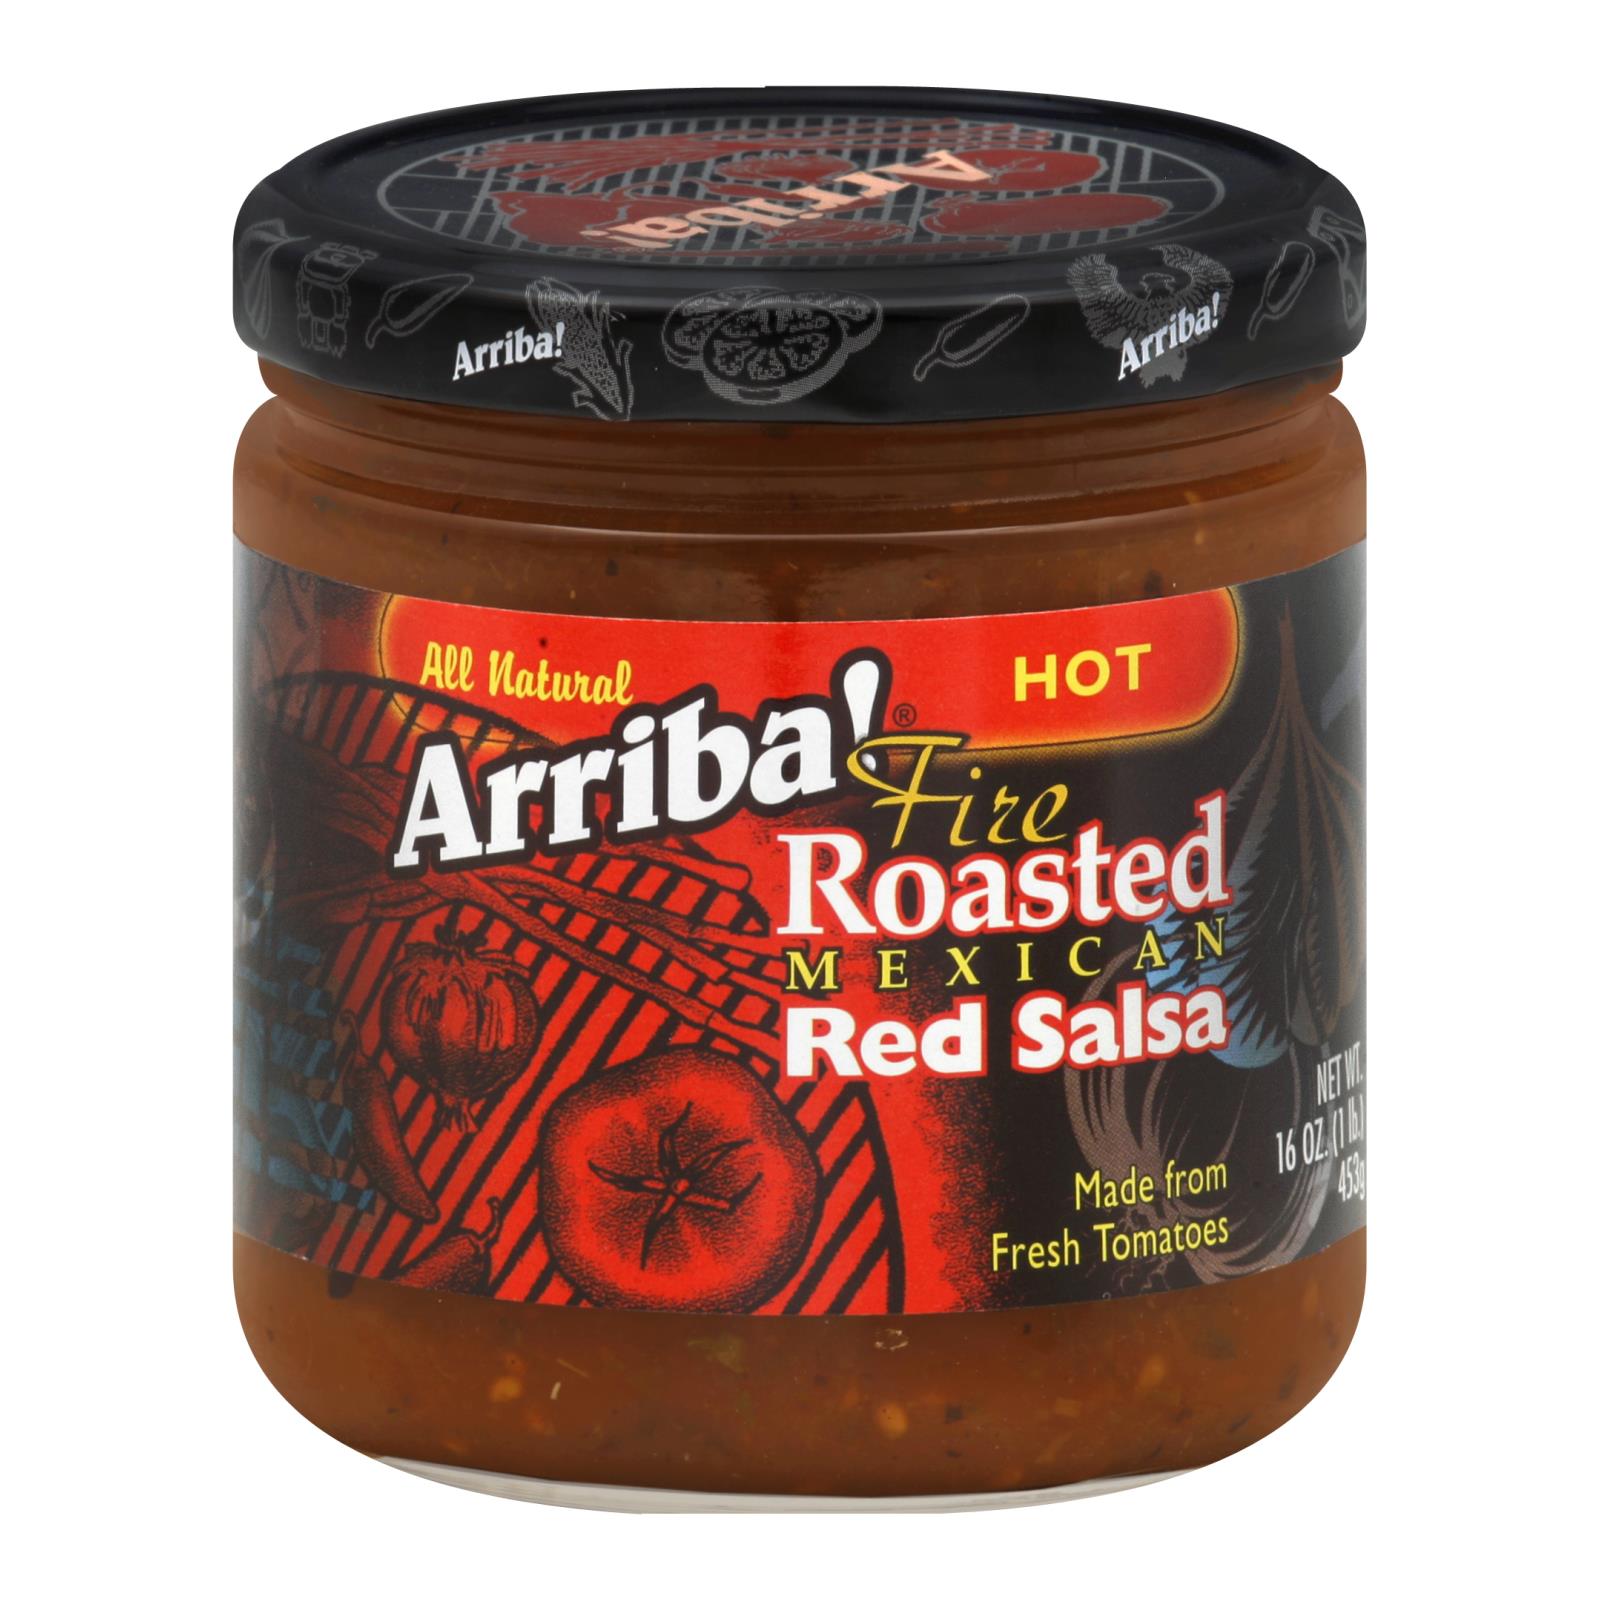 Arriba, Arriba Roasted Red Salsa - Hot - Case of 6 - 16 oz. (Pack of 6)